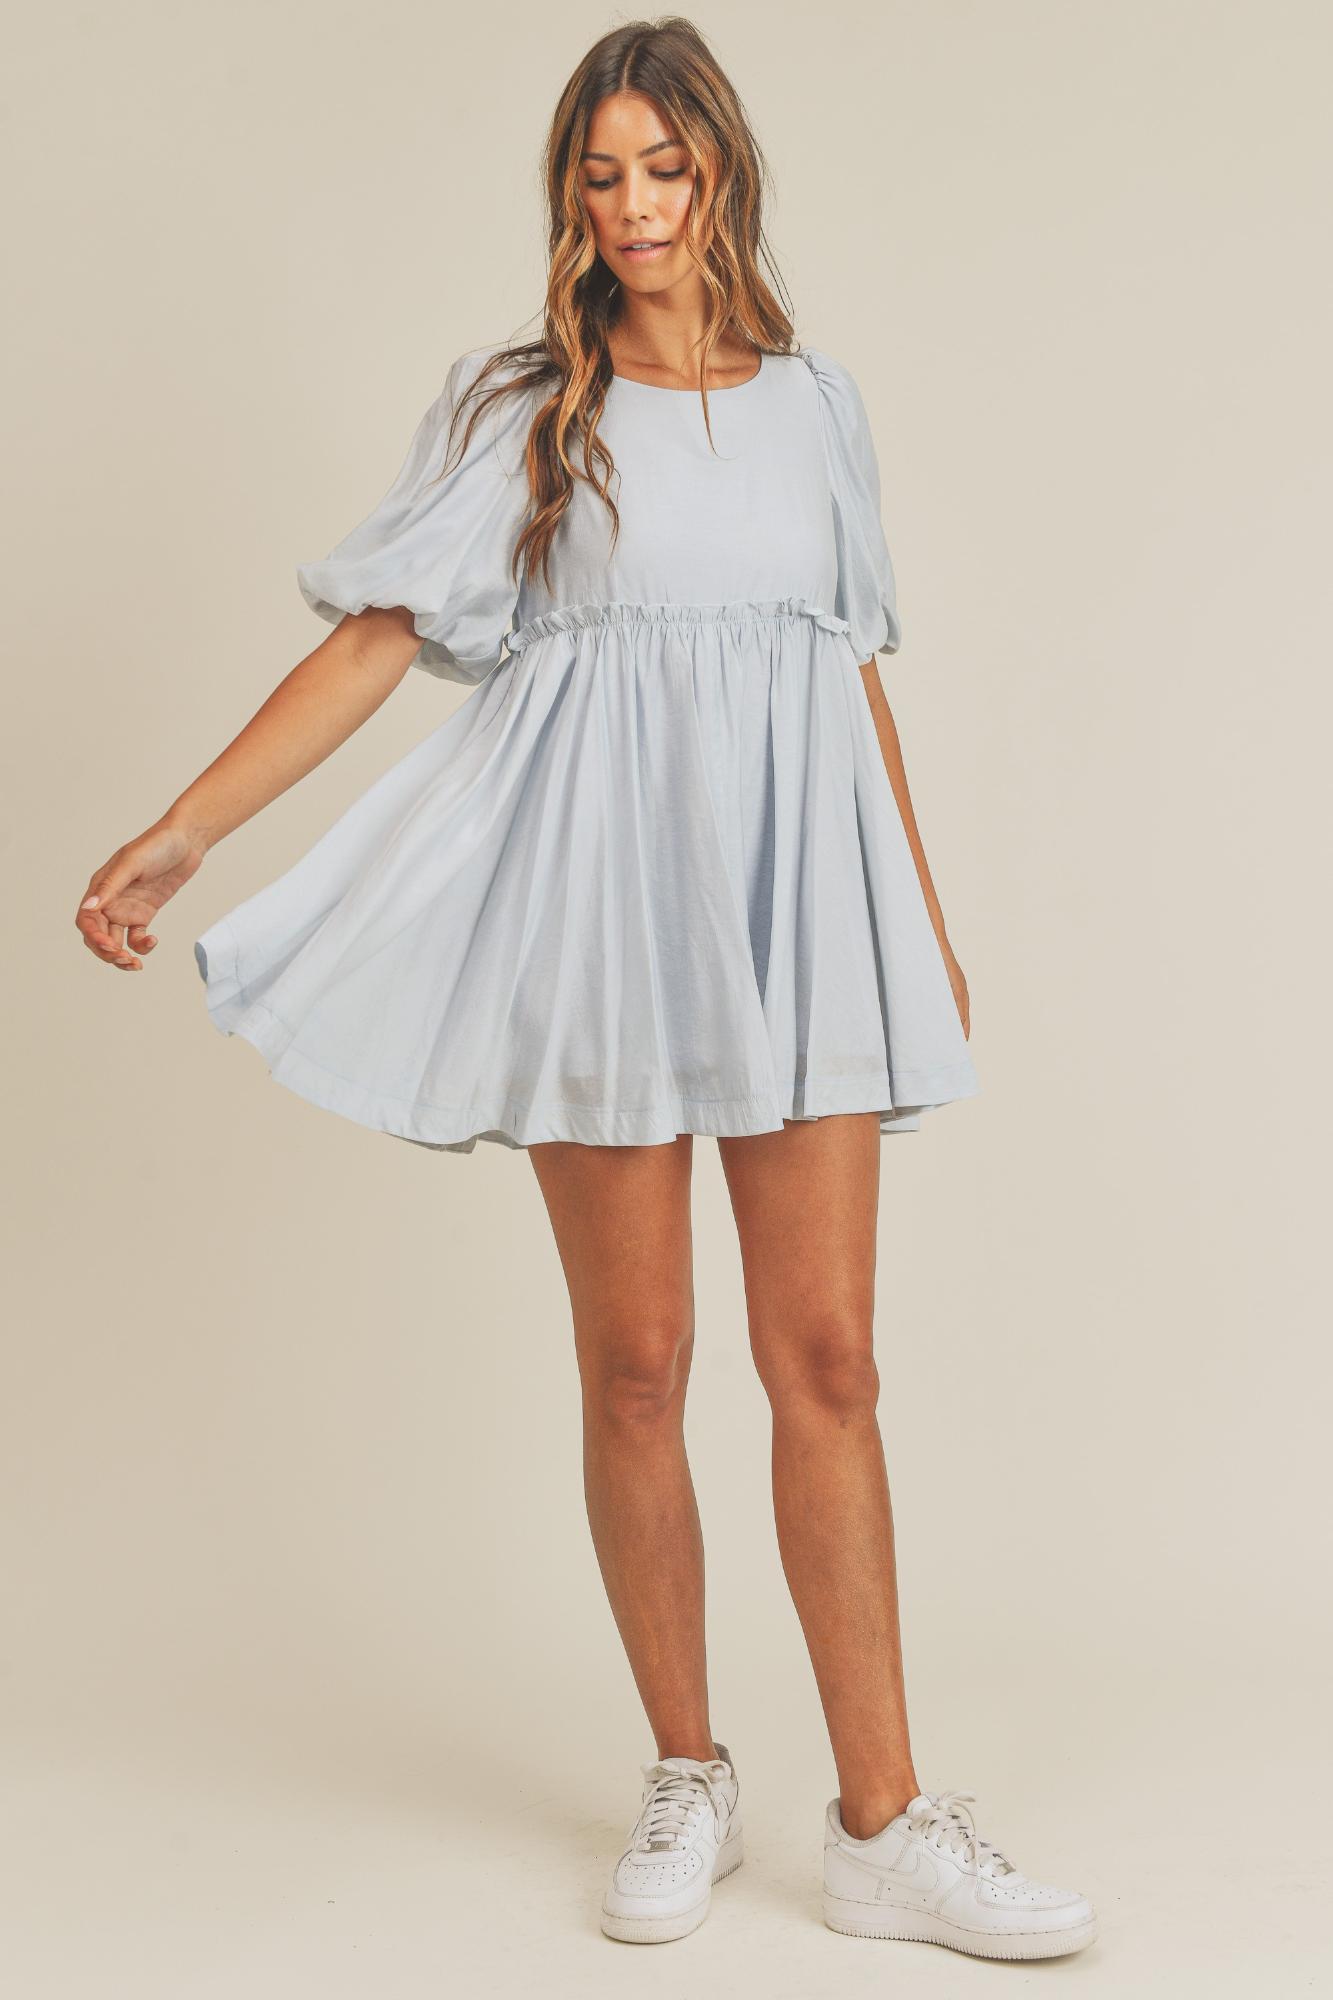 Something To Talk About Puff Sleeve Dress